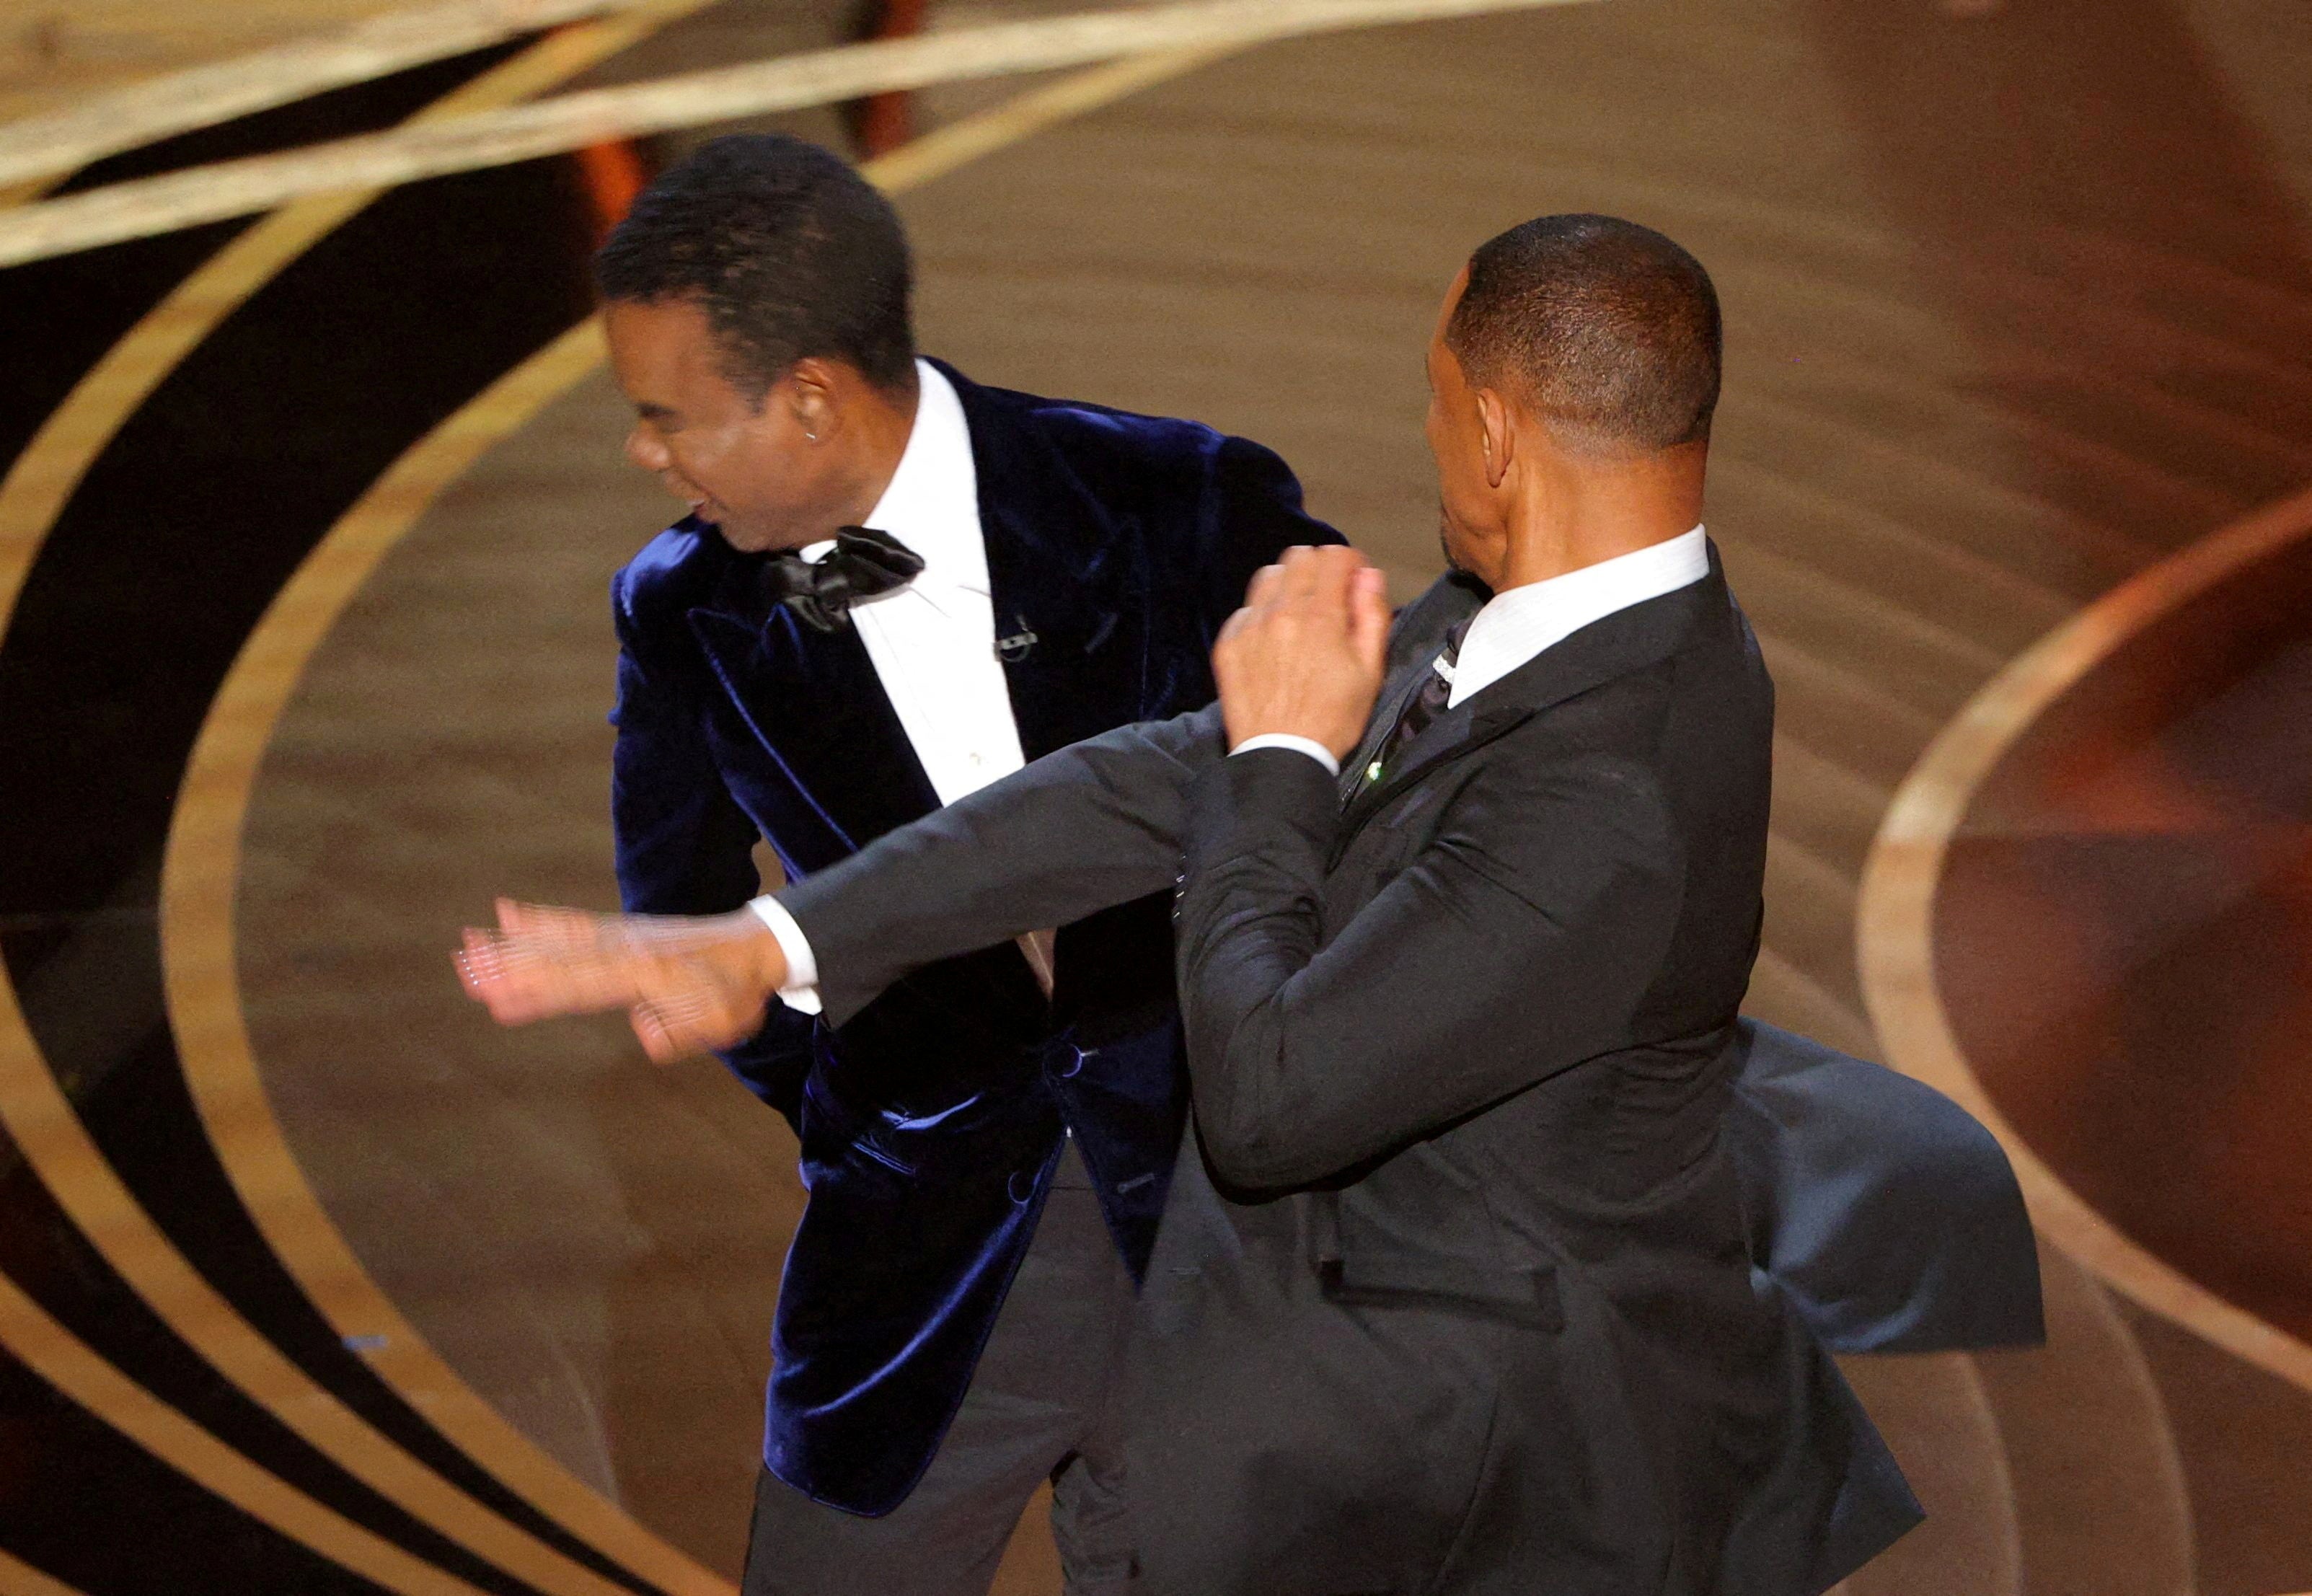 Will Smith hits Chris Rock at the 2022 Oscars ceremony